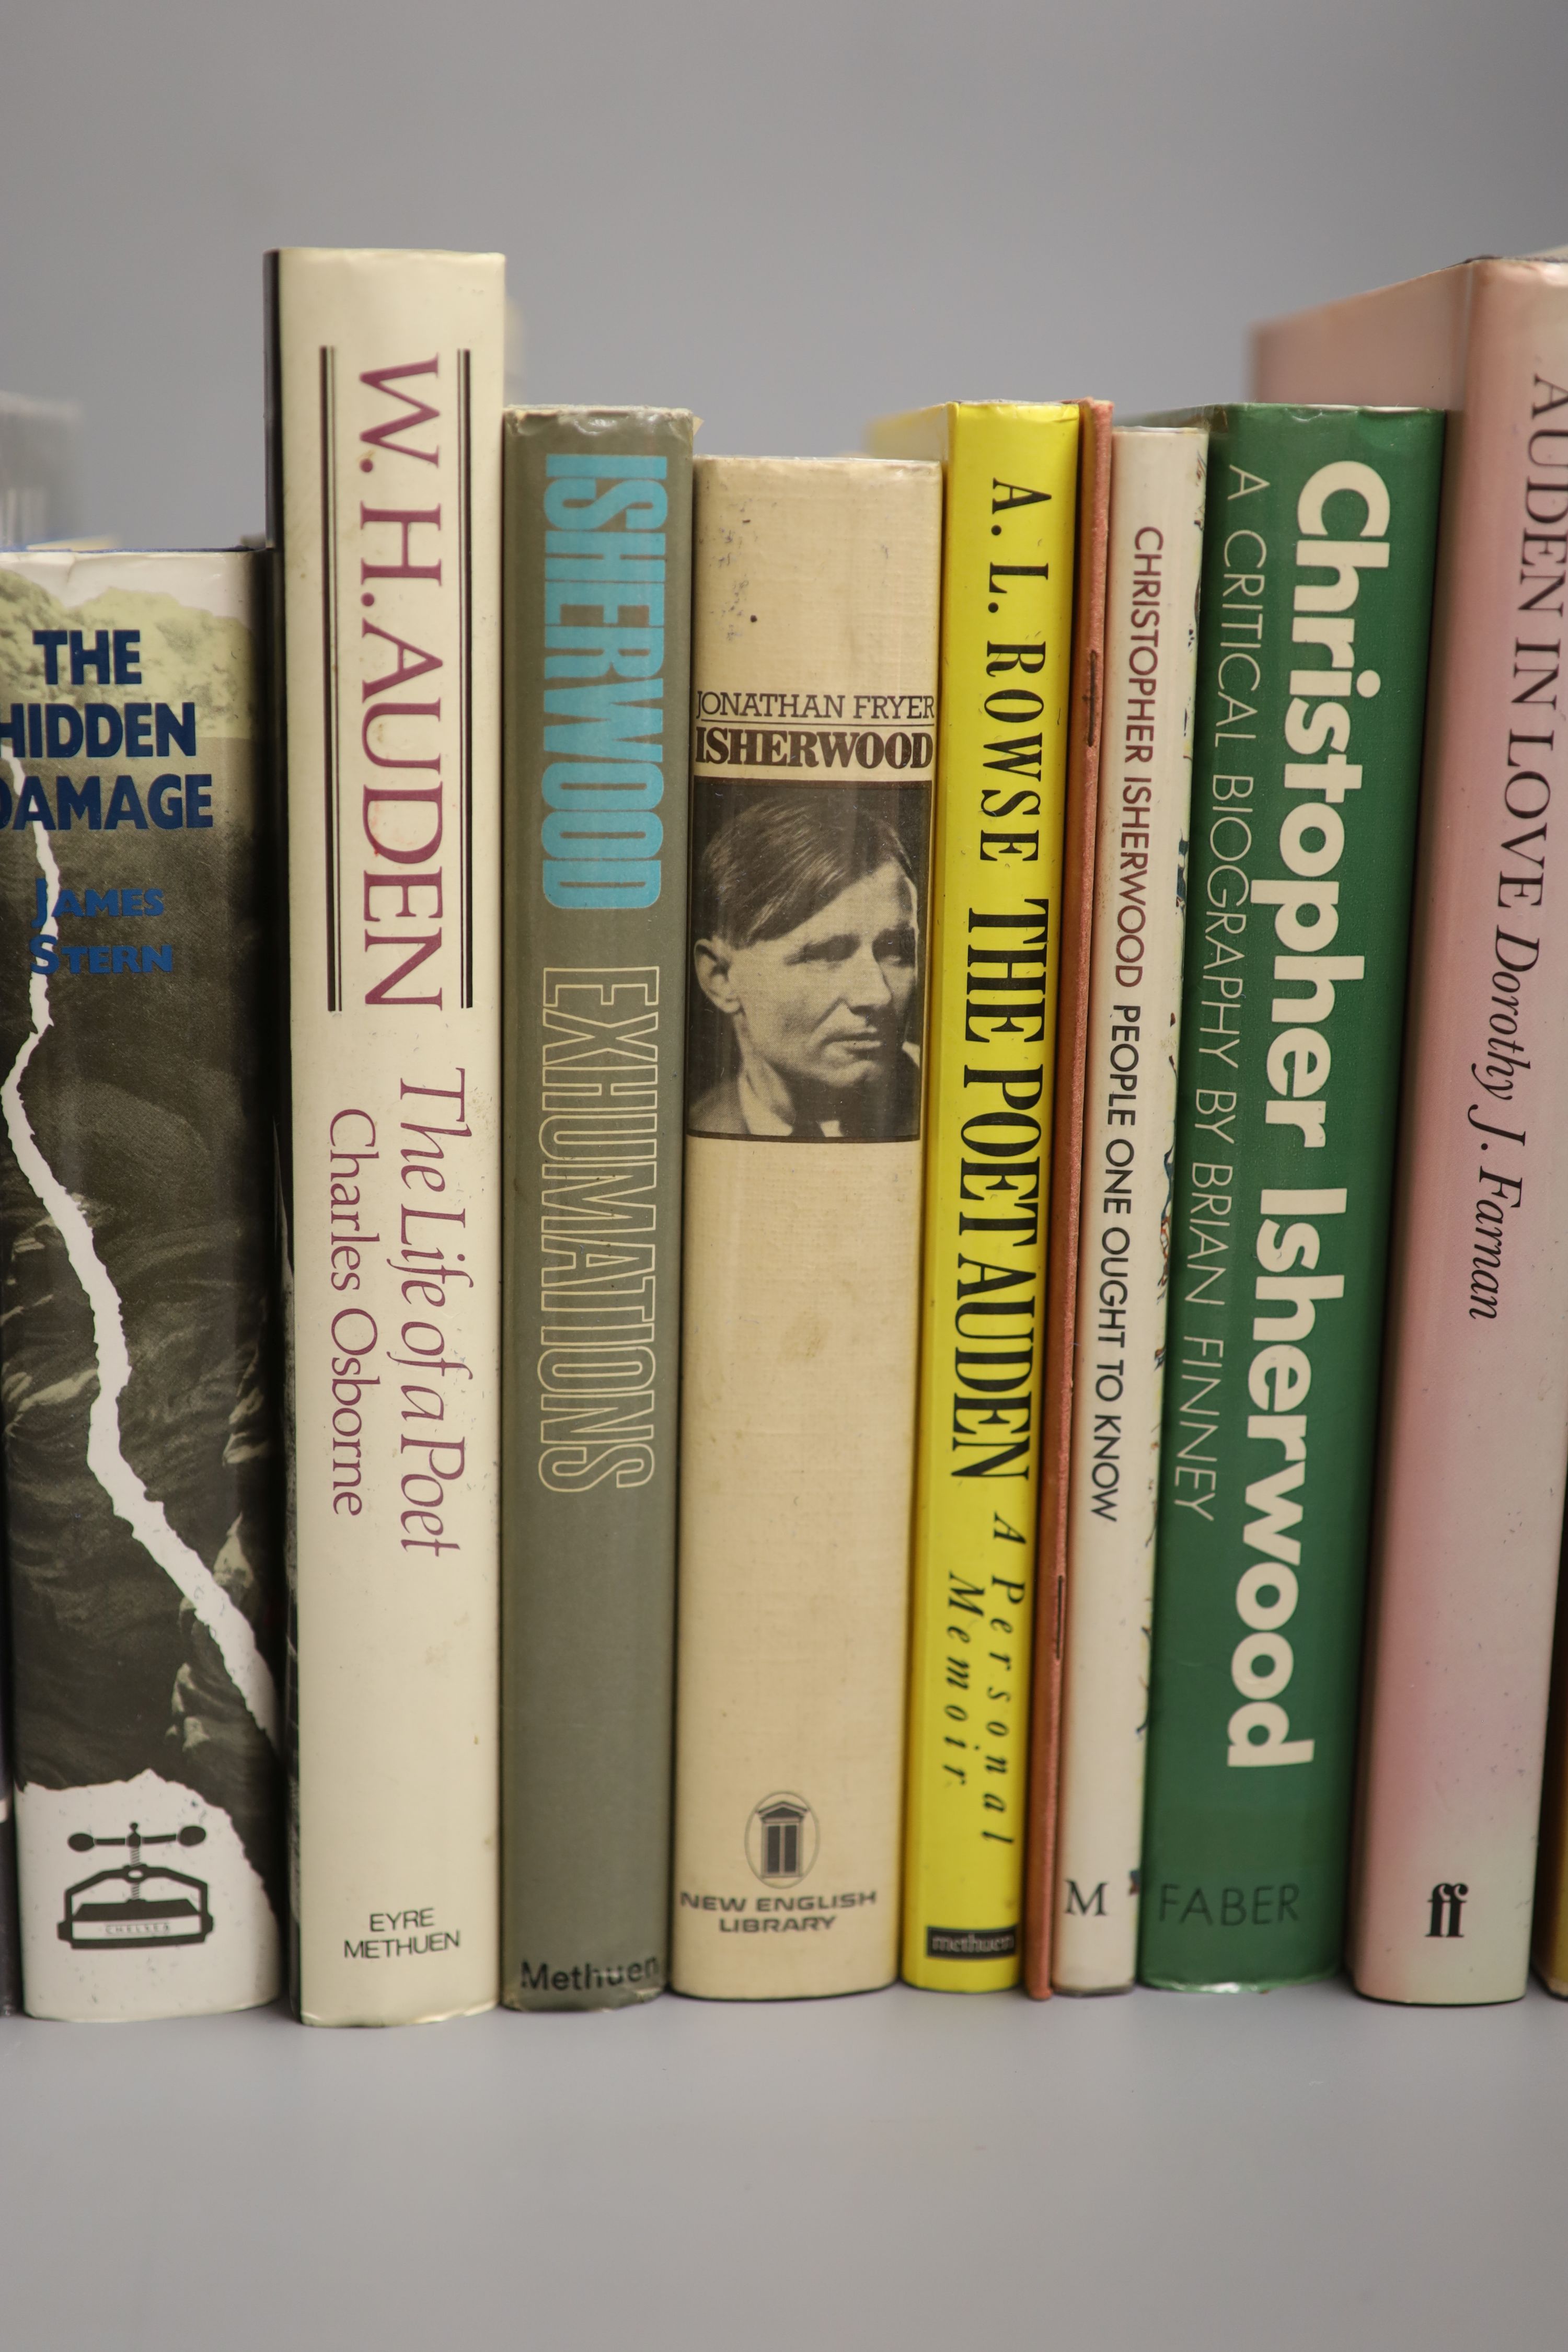 Auden, W.H. & Isherwood, Christopher. A selection of Books - by and about